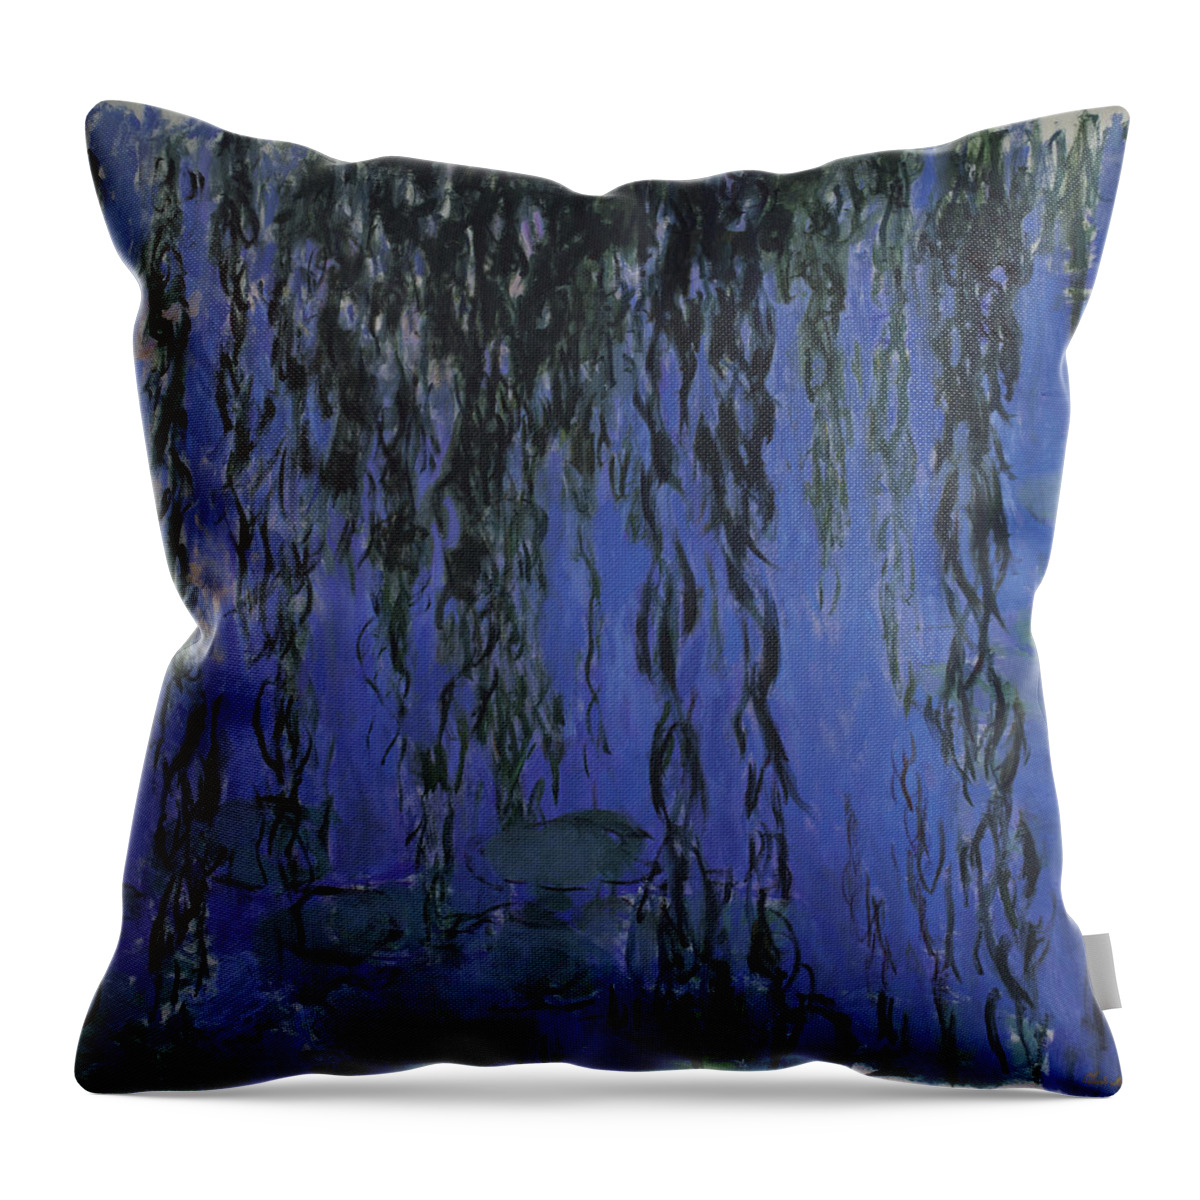 Claude Monet  Meadow In Givernyclaude Monet  Meadow In Givernyclaude Monet  Meadow In Givernyclaude Monet  Meadow In Givernyclaude Monet  Meadow In Givernyclaude Monet  Meadow In Givernyclaude Monet  Meadow In Giverny Throw Pillow featuring the painting Claude Monet Water Lilies and Weeping Willow Branches by MotionAge Designs